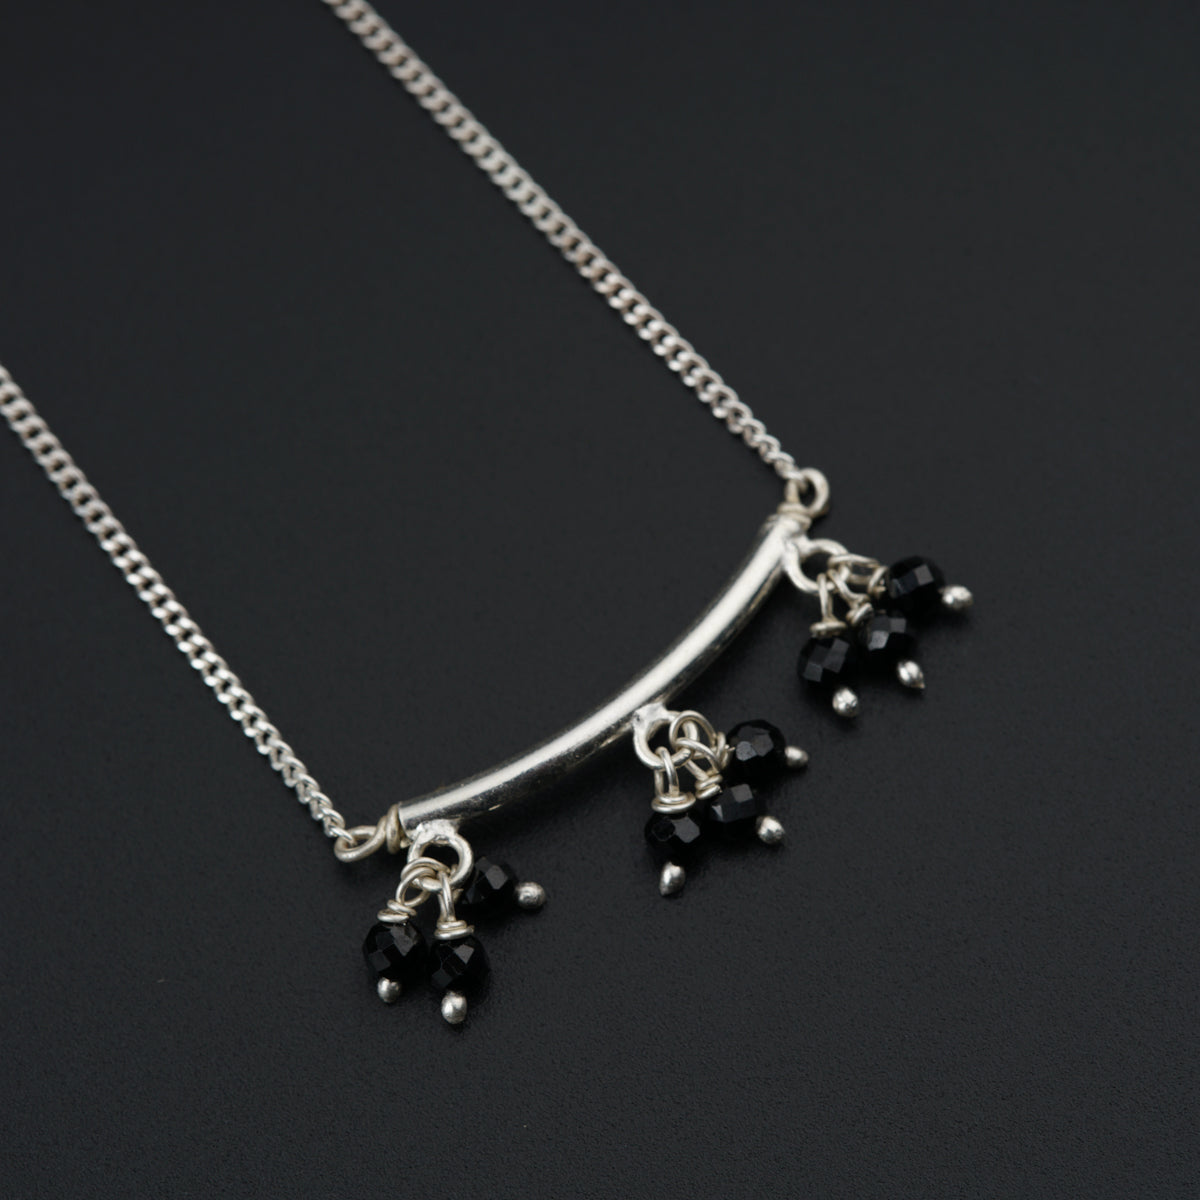 a silver necklace with black beads hanging from it